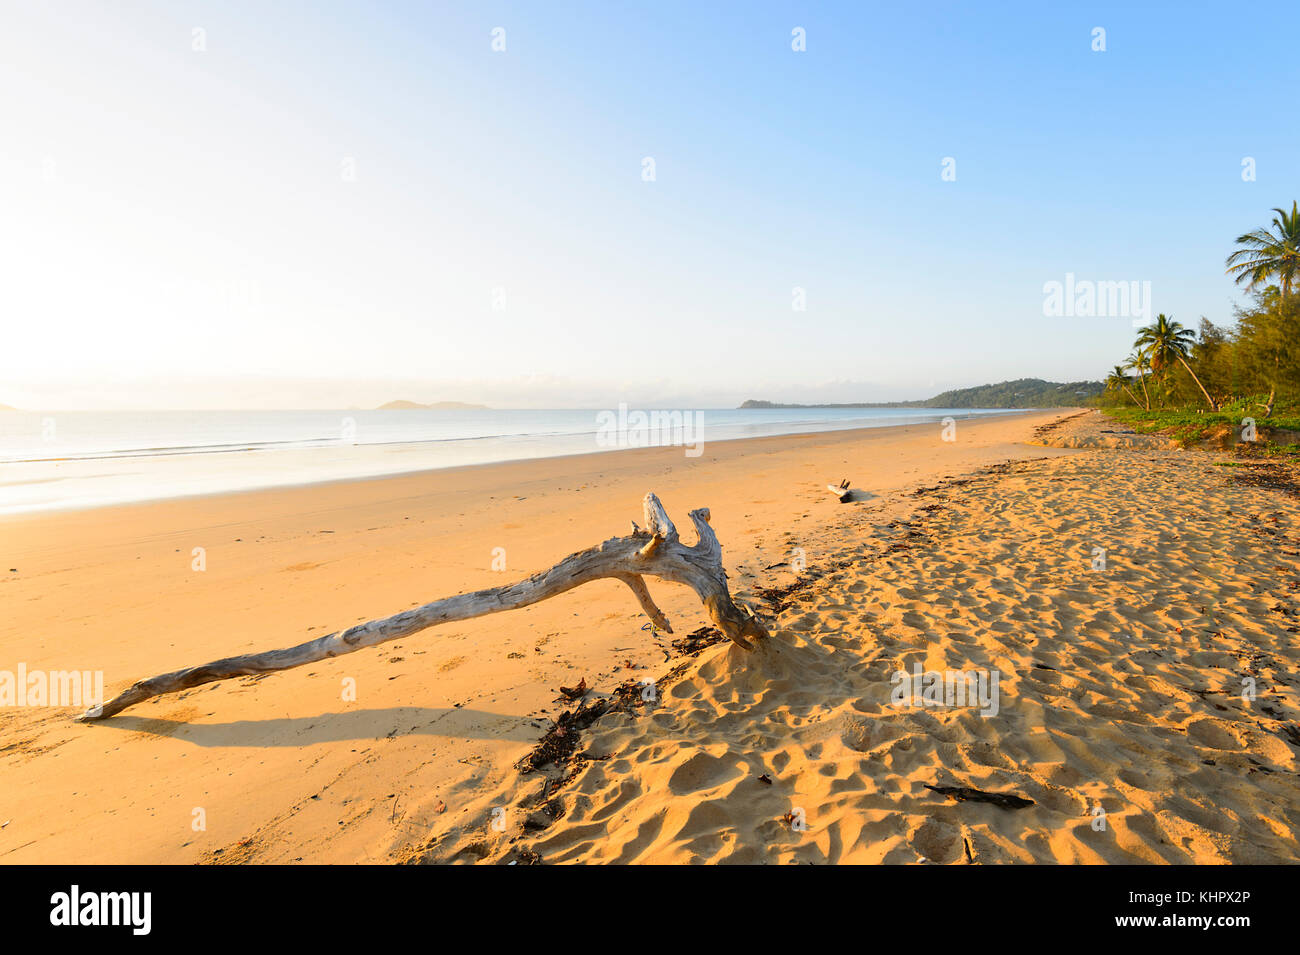 The sandy beach of South Mission Beach in the evening light, Coral Sea, Far North Queensland, FNQ, Australia Stock Photo